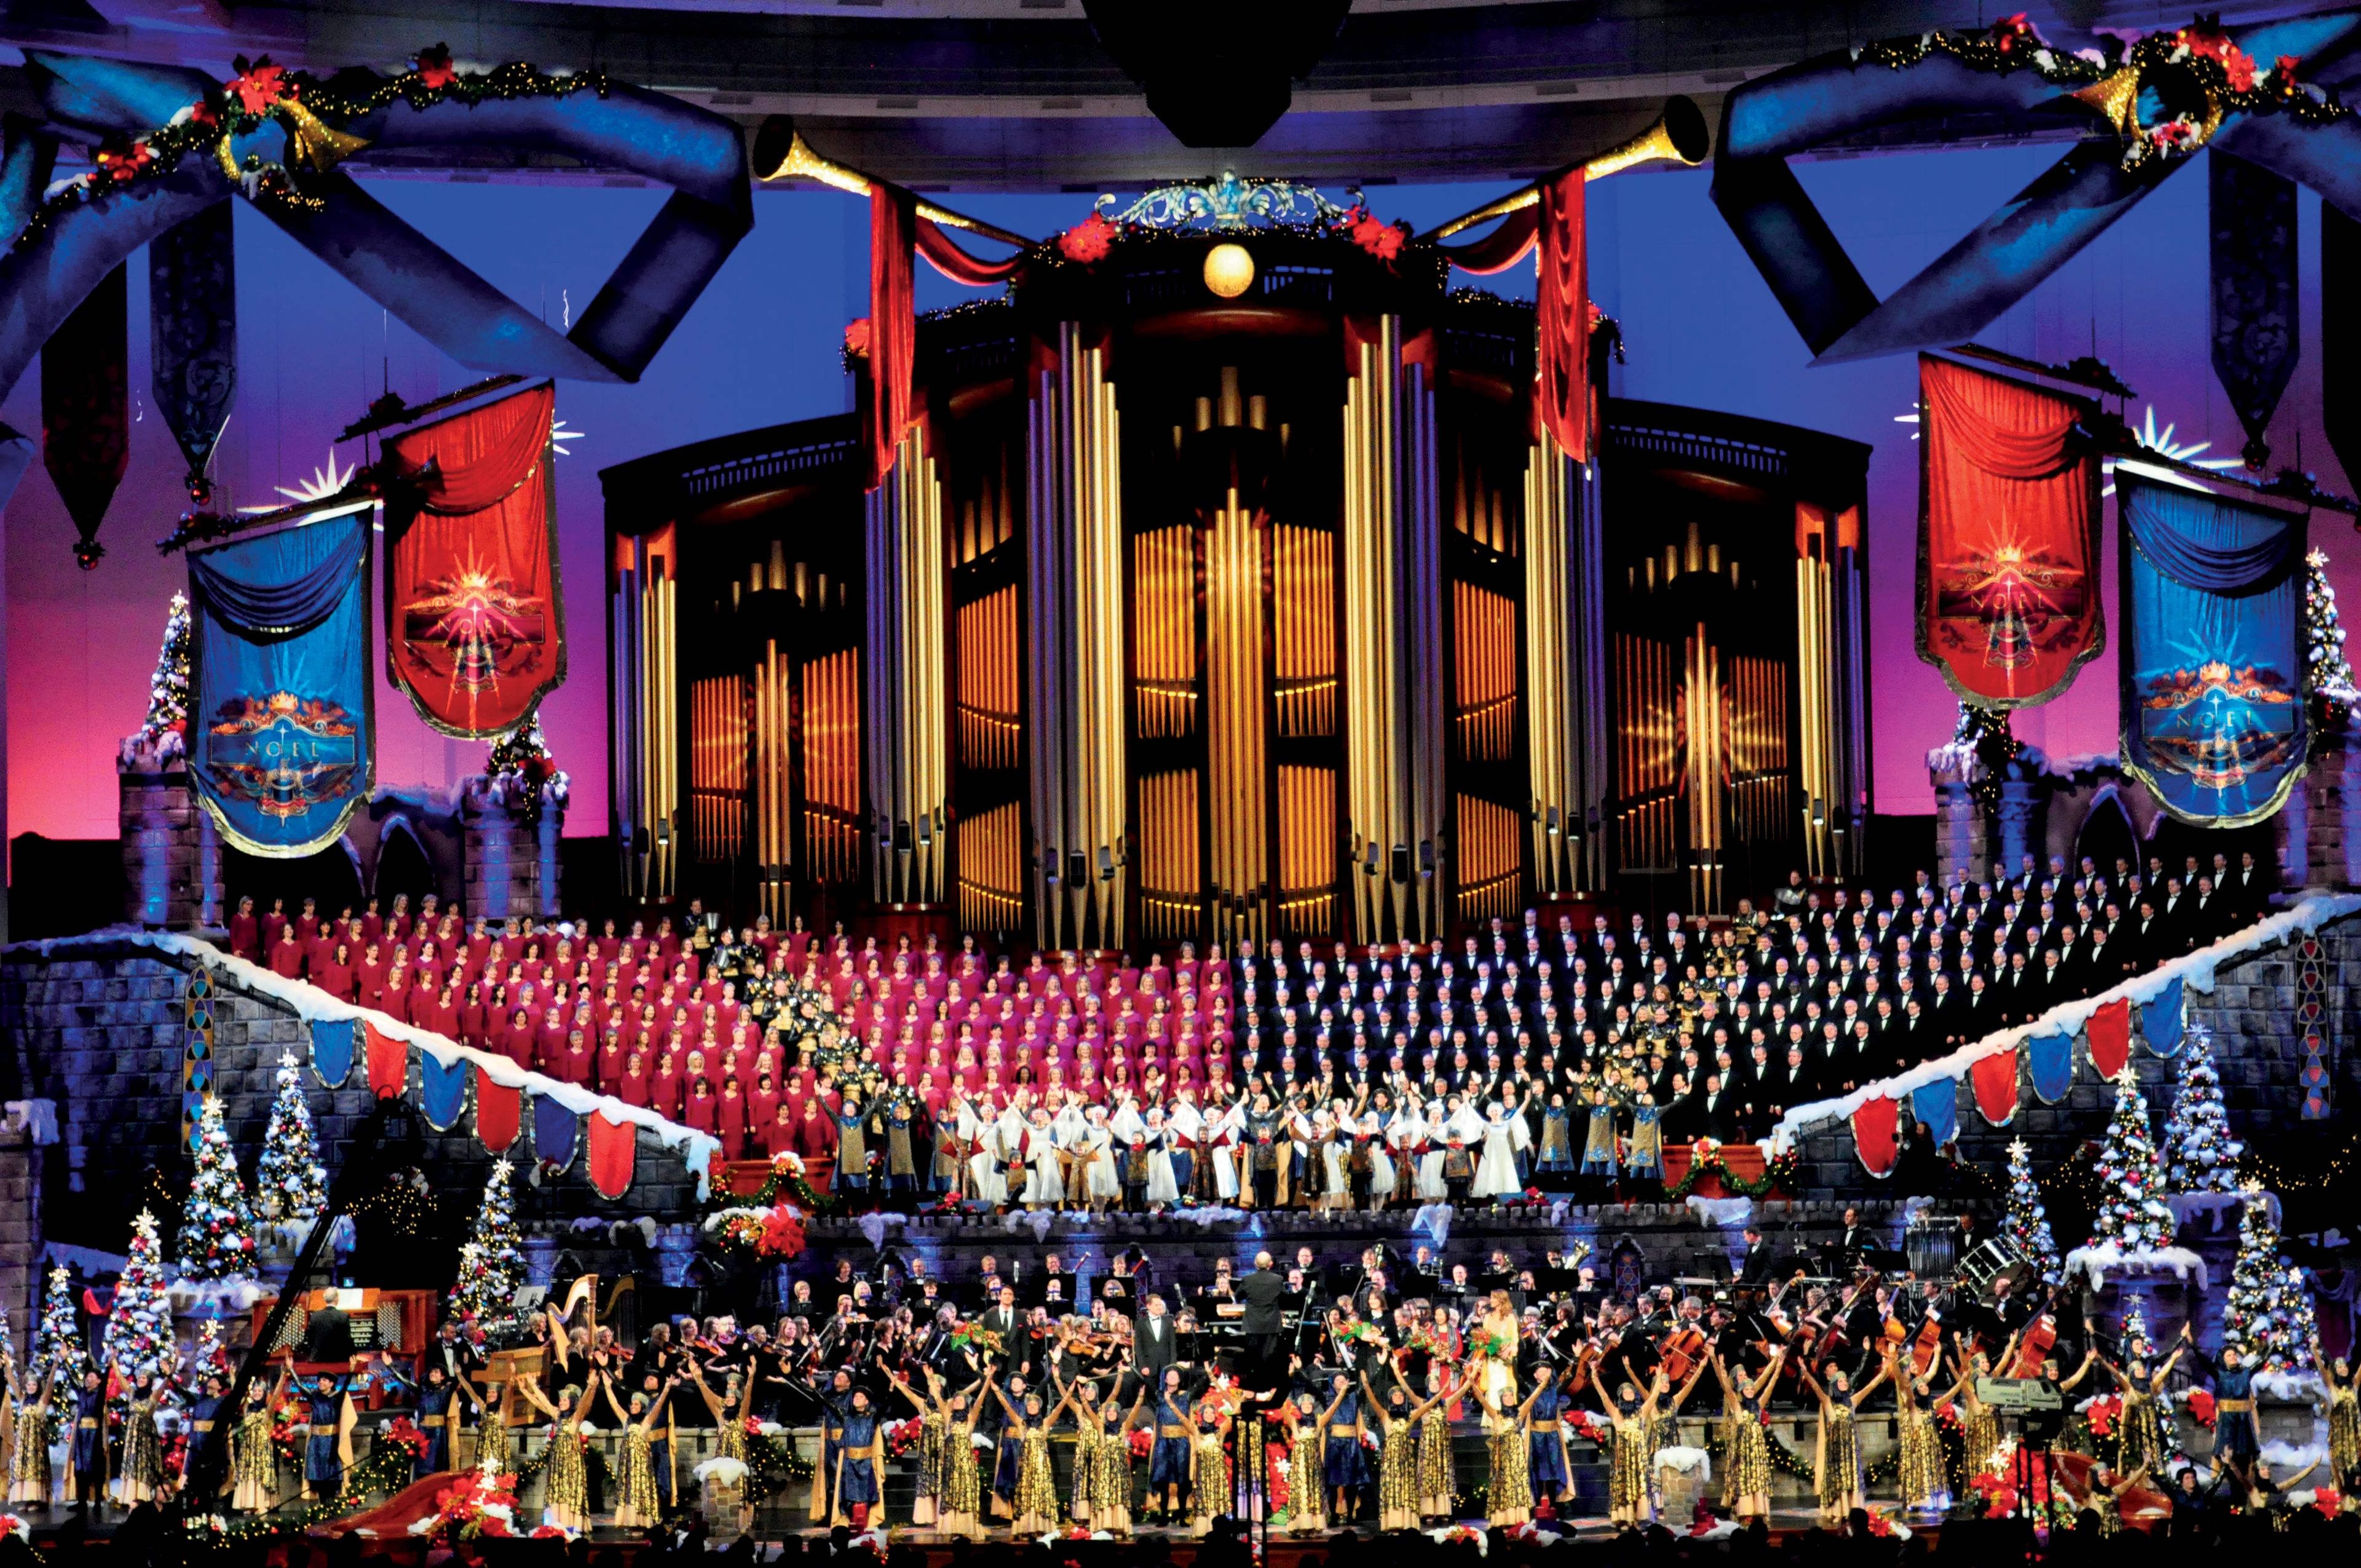 The stage set for the Mormon Tabernacle Choir Christmas concert, December 2011, featuring Jane Seymour and Nathan Gunn.